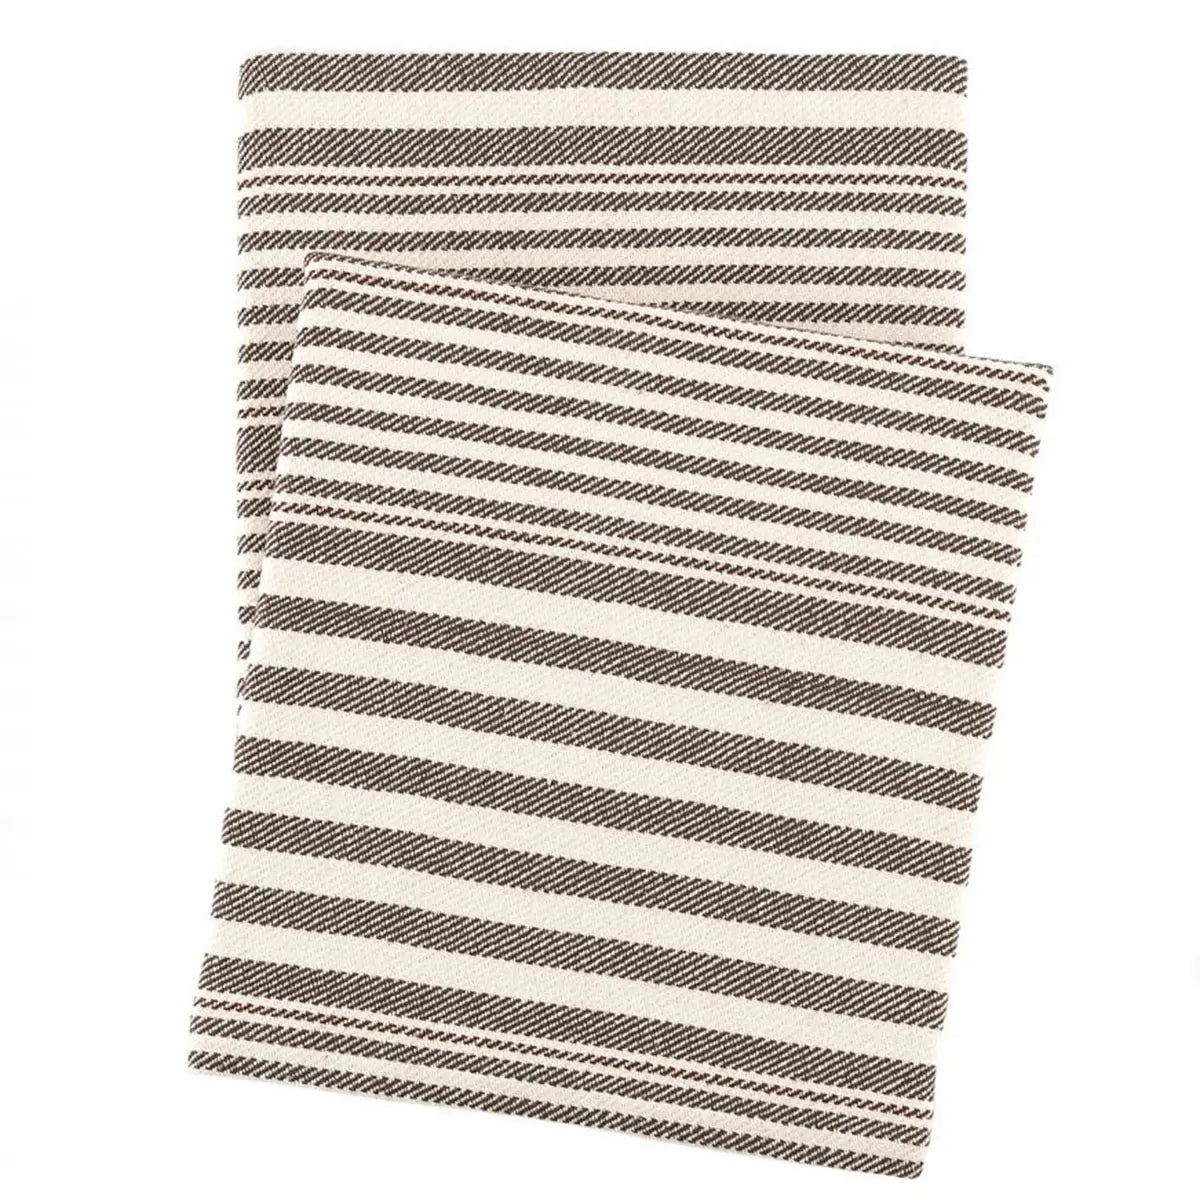 Dash & Albert Rugby Stripe Throw in Charcoal